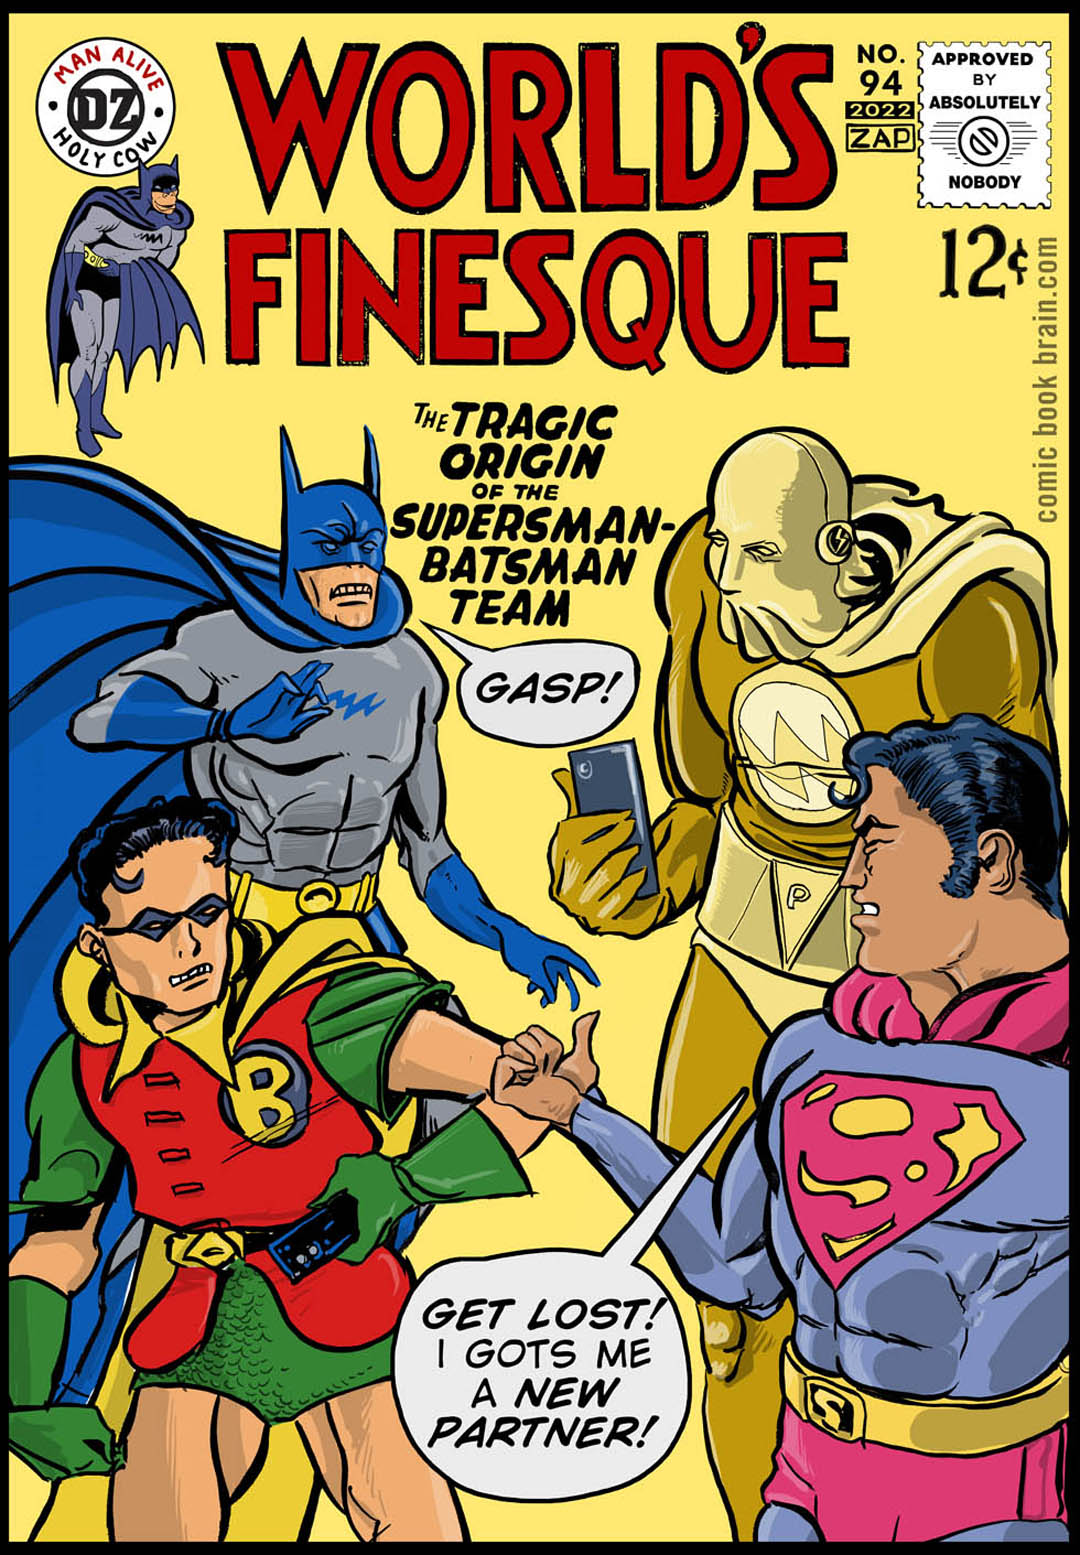 Worlds Finesque 94 Origin of the Bats and Supers Team by Blob Kane